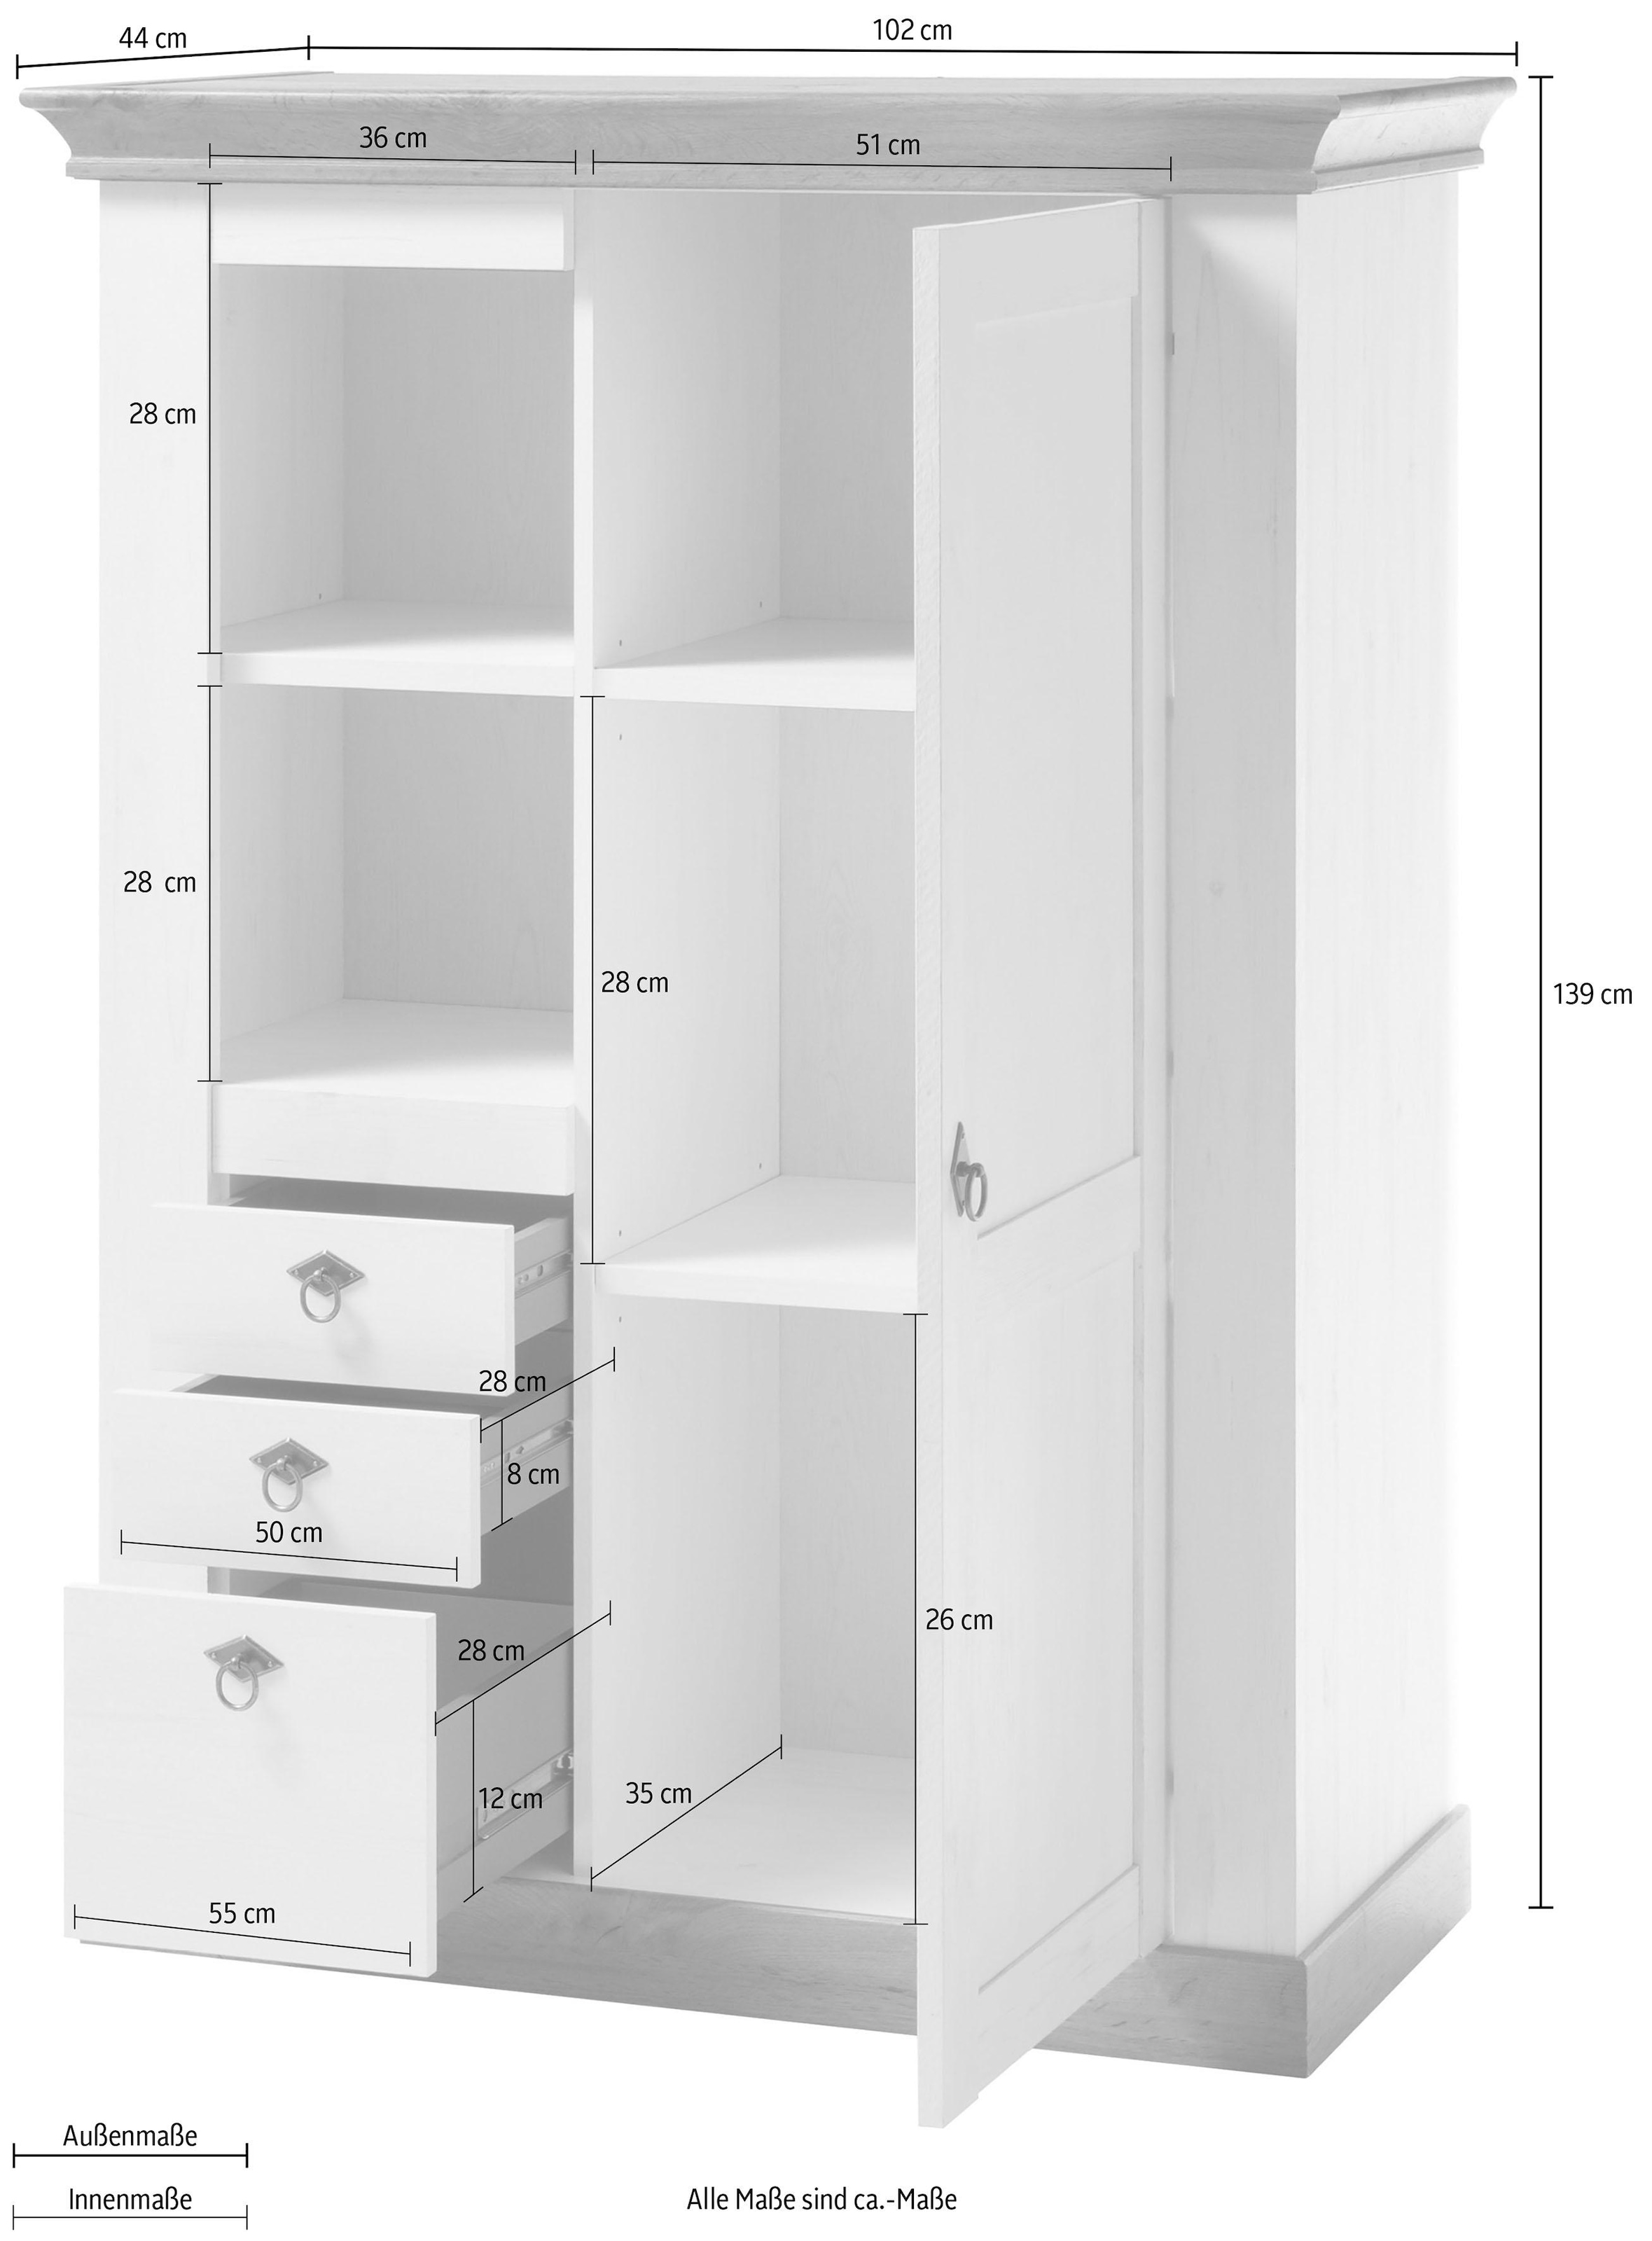 Home affaire Highboard »Cremona«, Höhe 139 cm